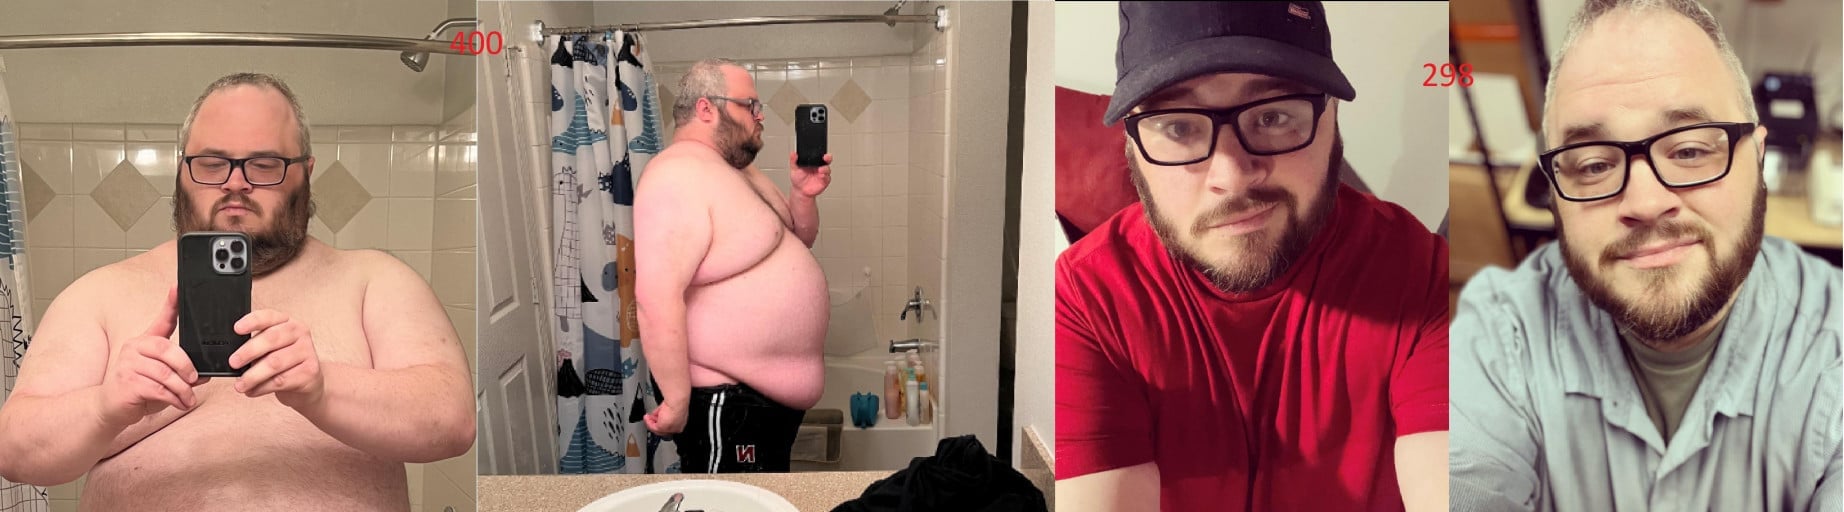 A before and after photo of a 5'11" male showing a weight reduction from 400 pounds to 298 pounds. A net loss of 102 pounds.